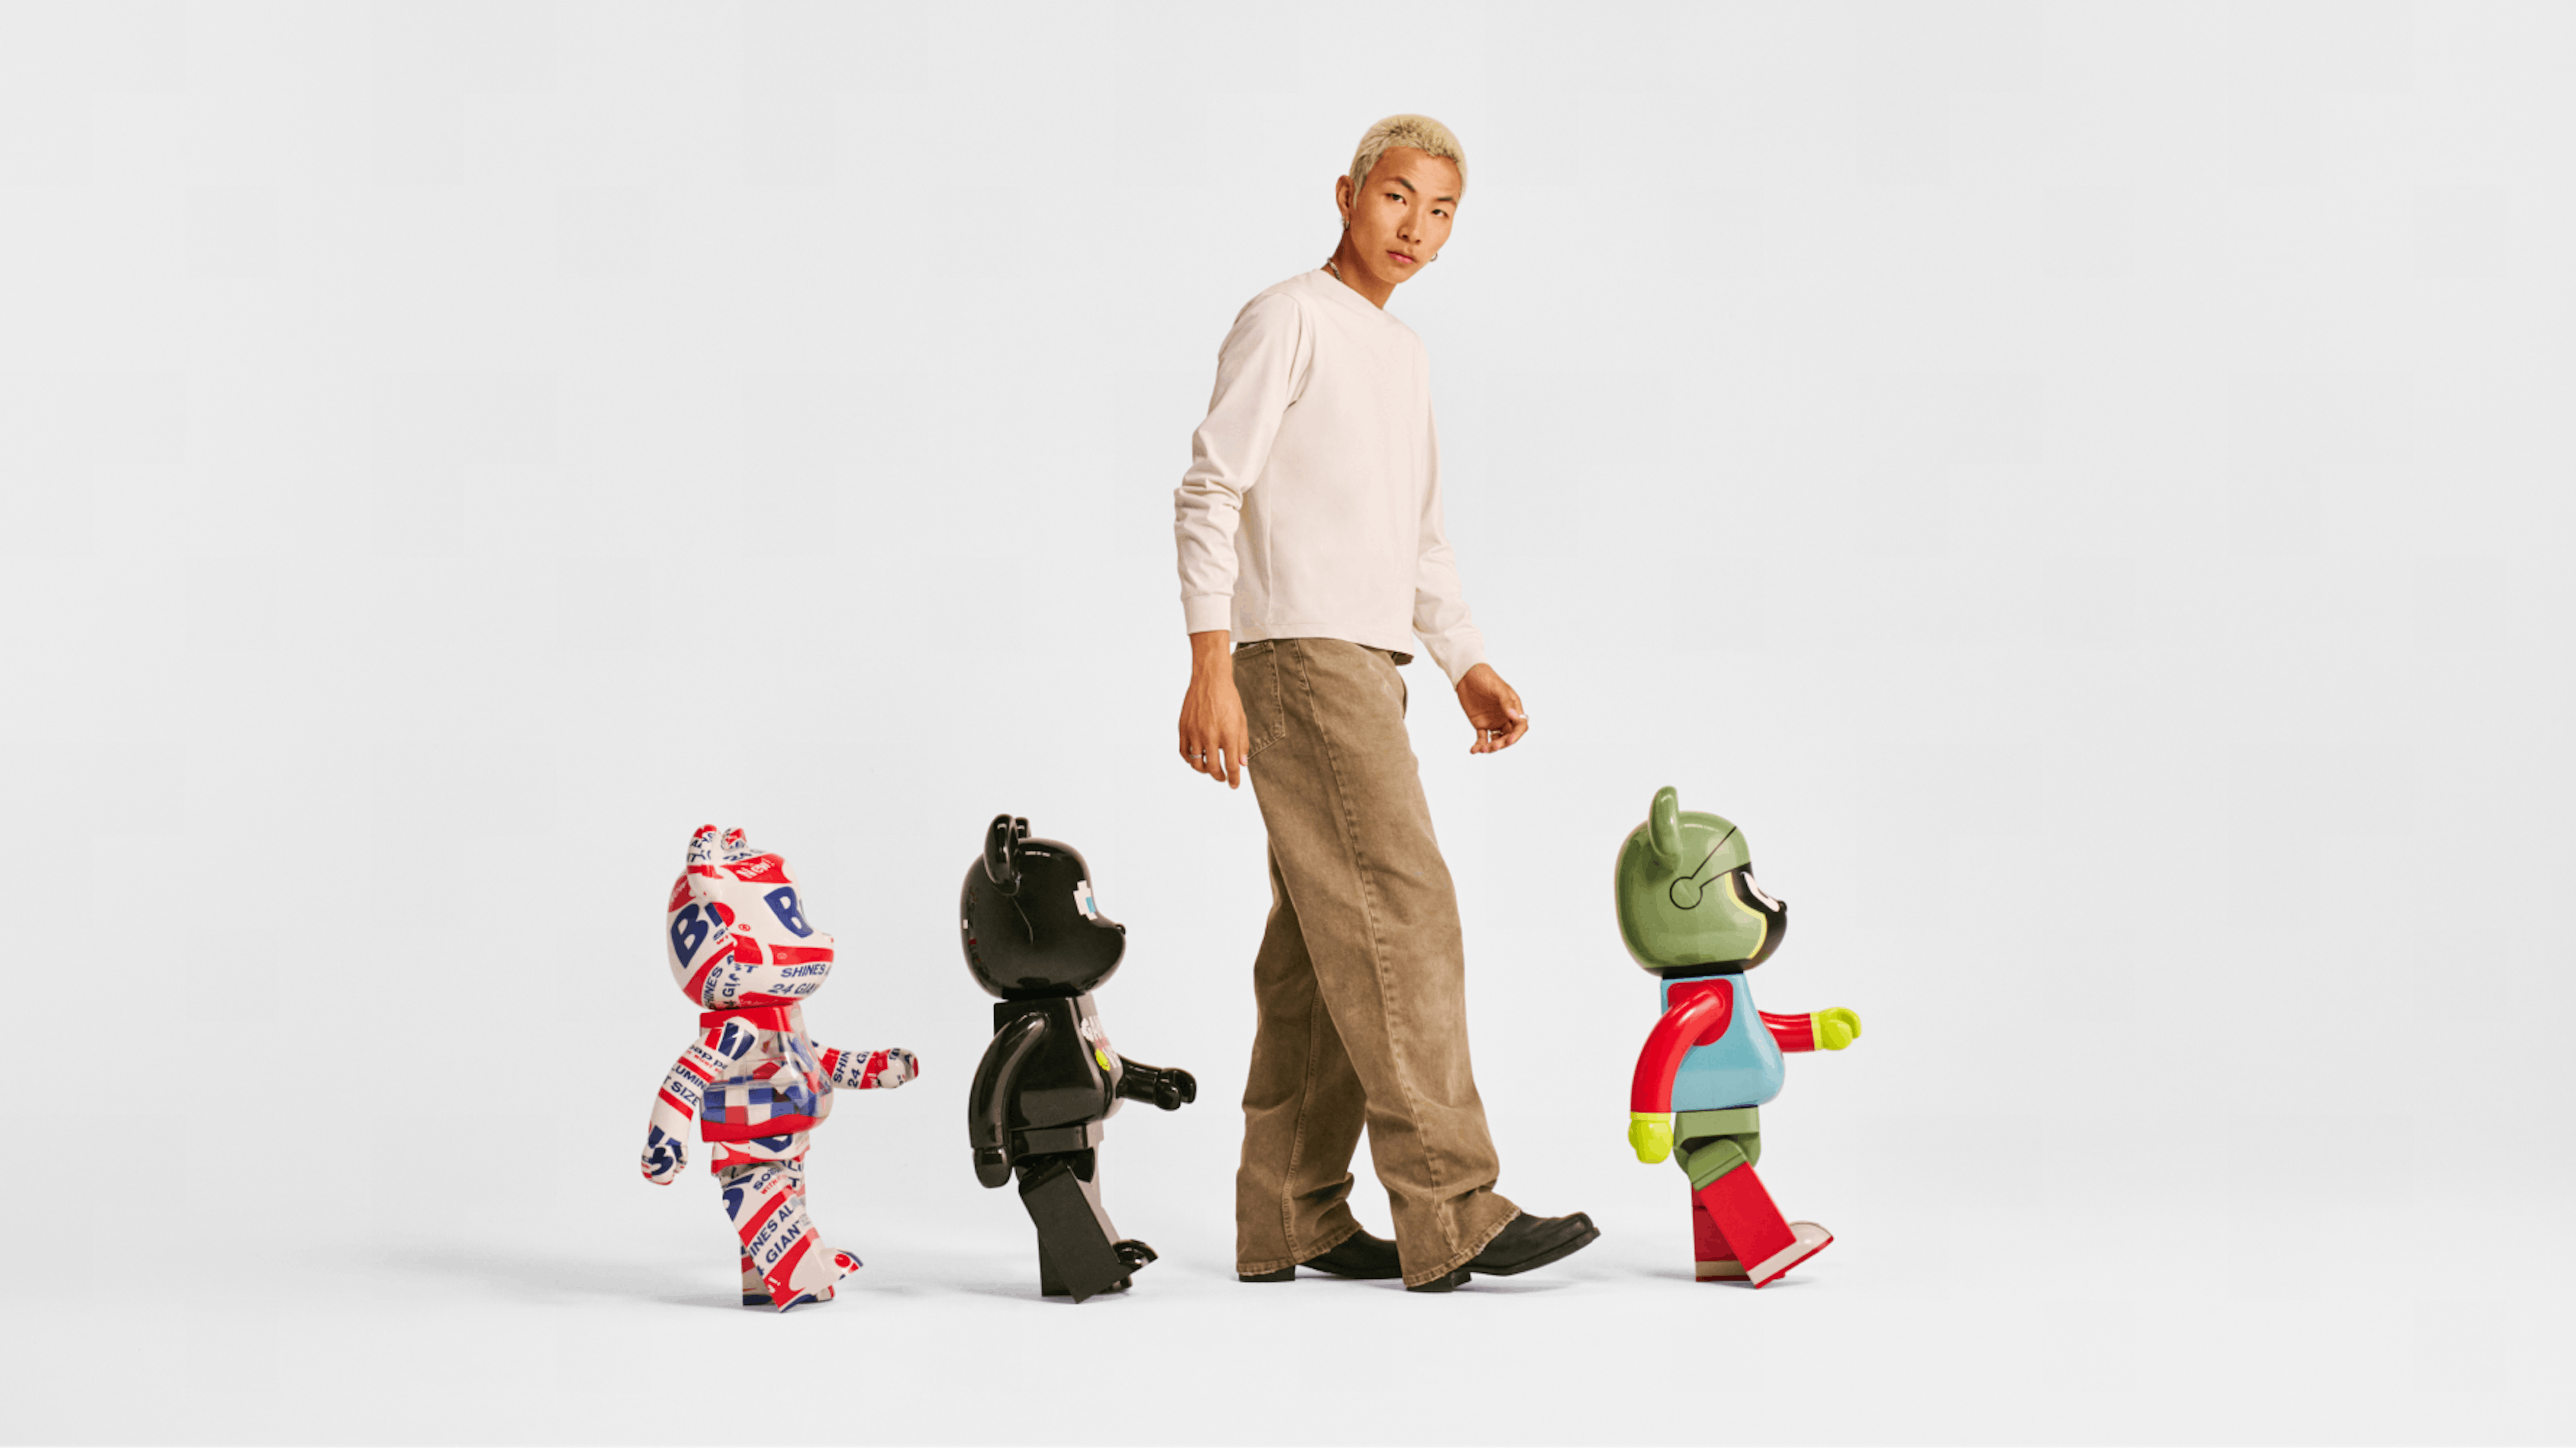 A person with bleached blonde hair, wearing a light long-sleeve shirt and beige pants, is walking alongside three colorful bearbricks. The bearbricks are designed with distinct patterns and colors, creating a playful and whimsical scene against a plain white background.